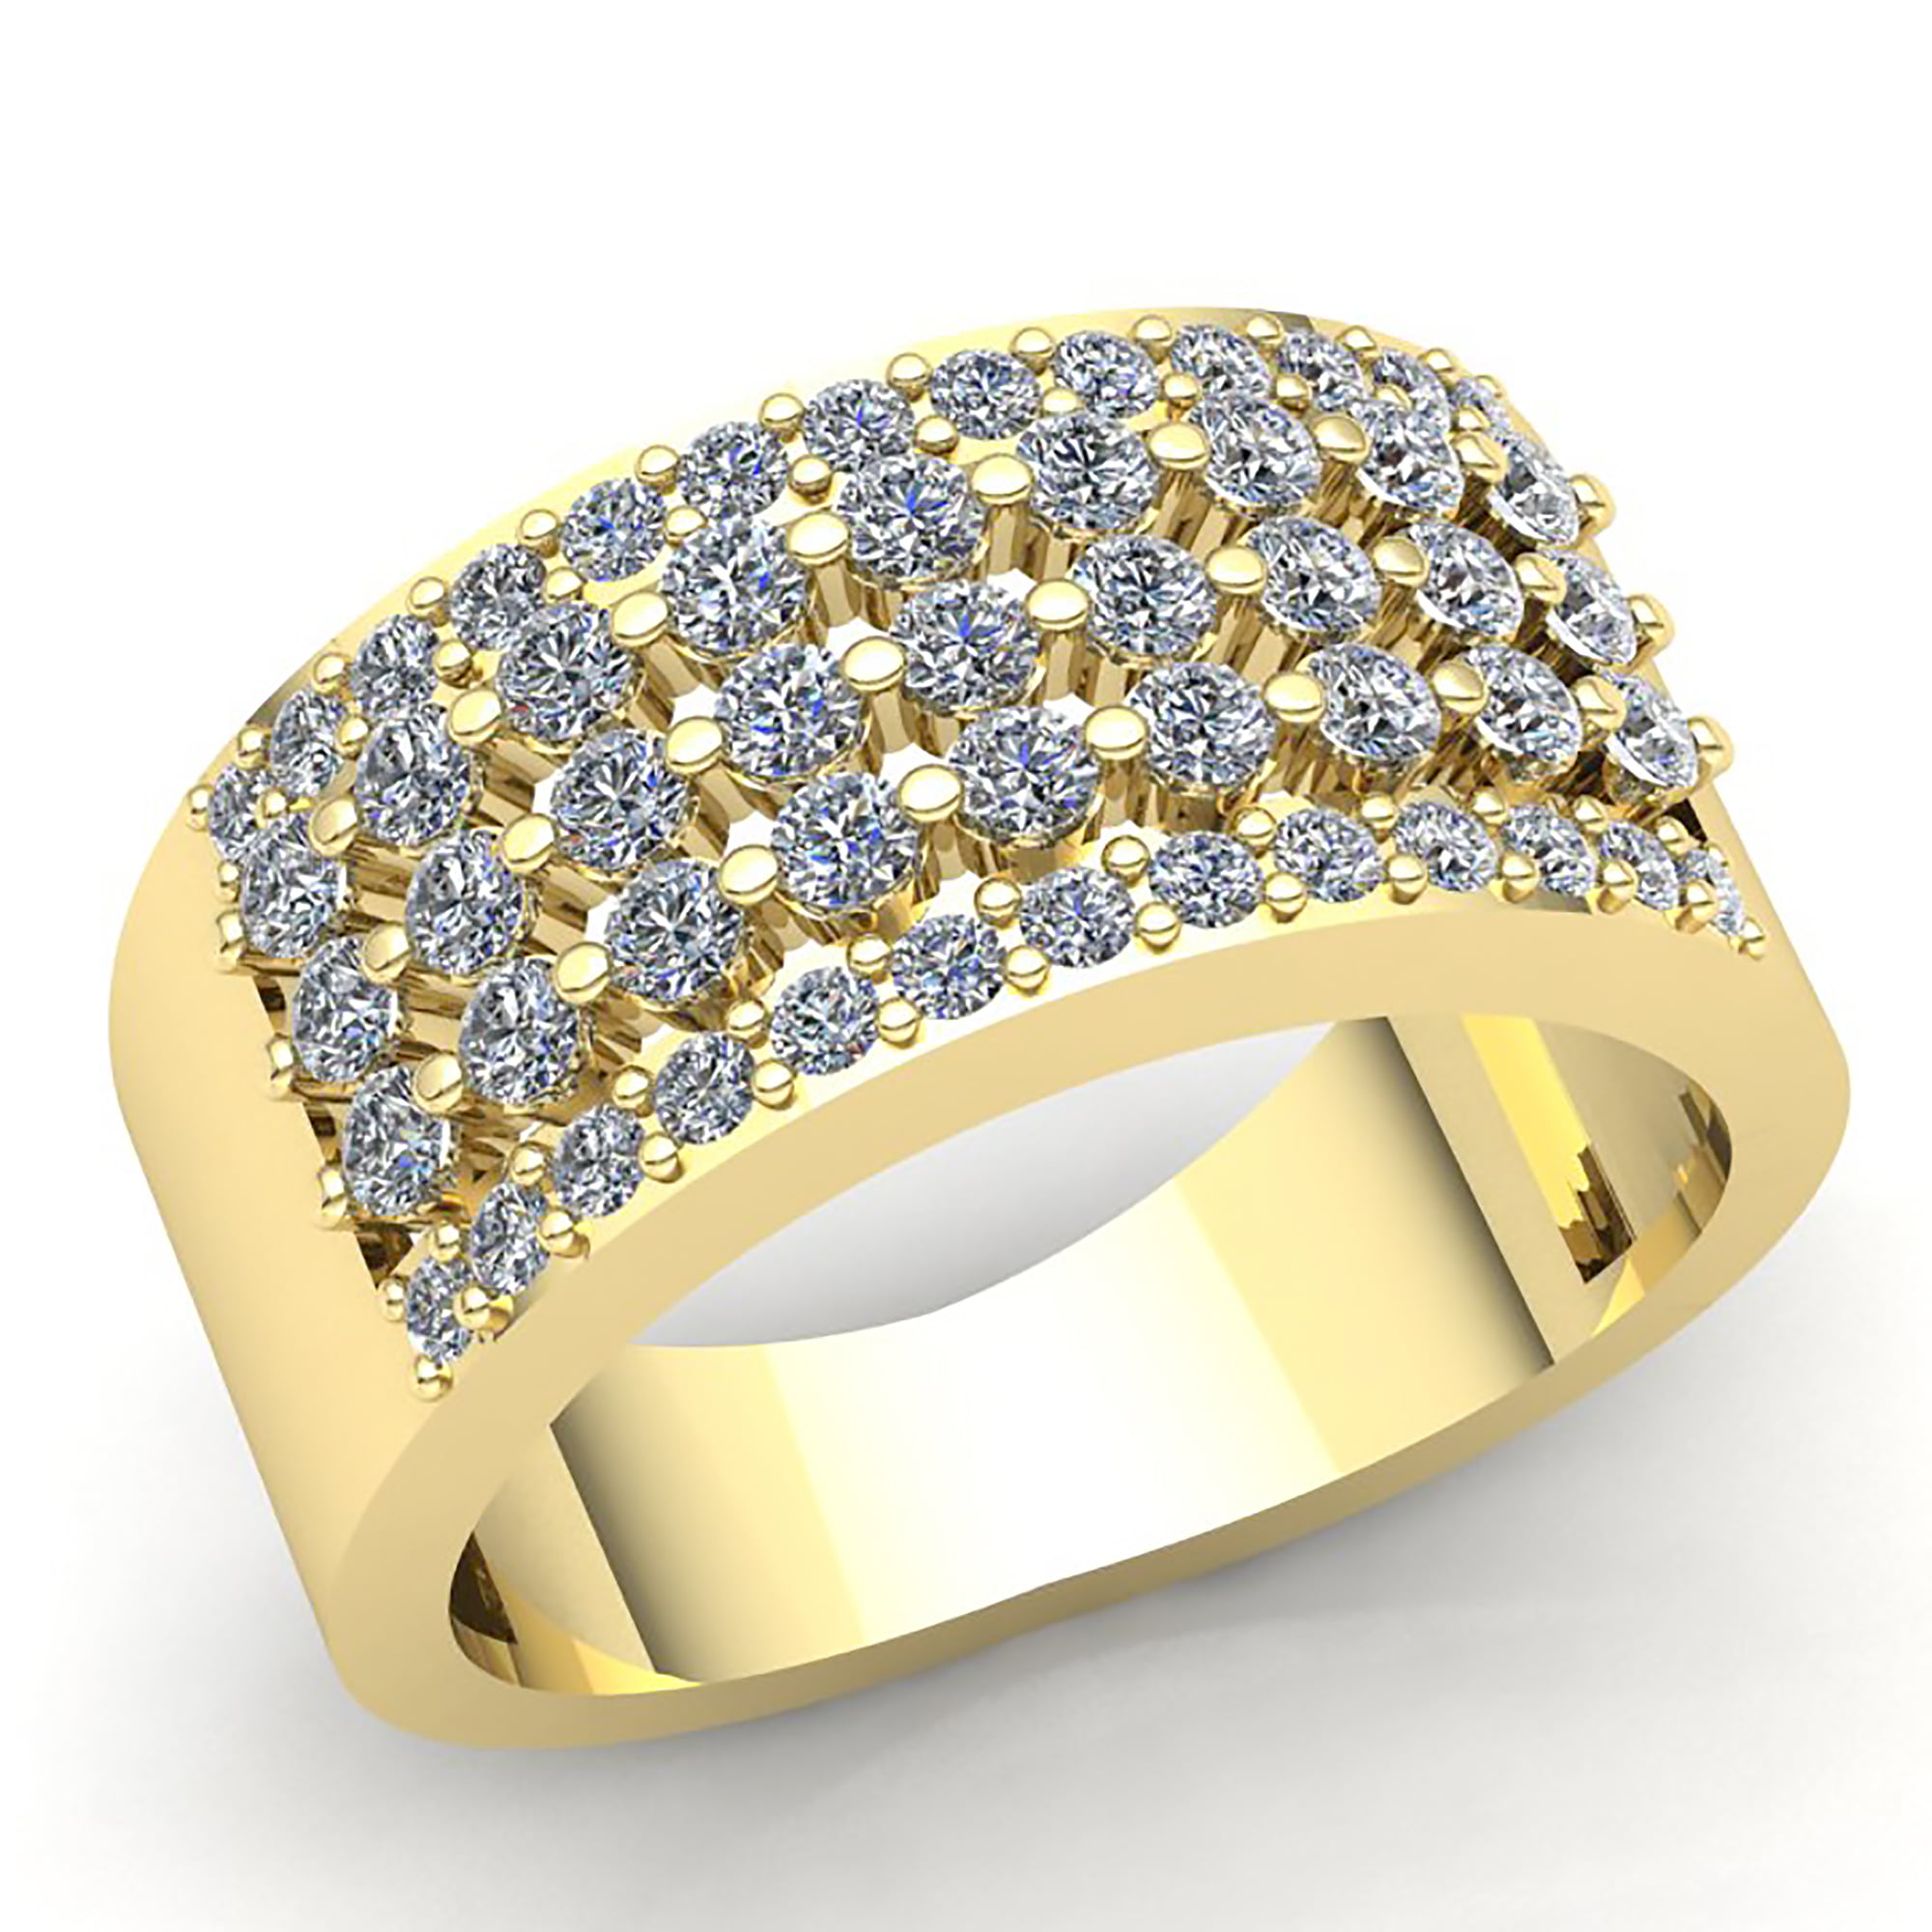 Details about   10k or 14k Solid Yellow Gold White CZ Anniversary Band Ladies Ring